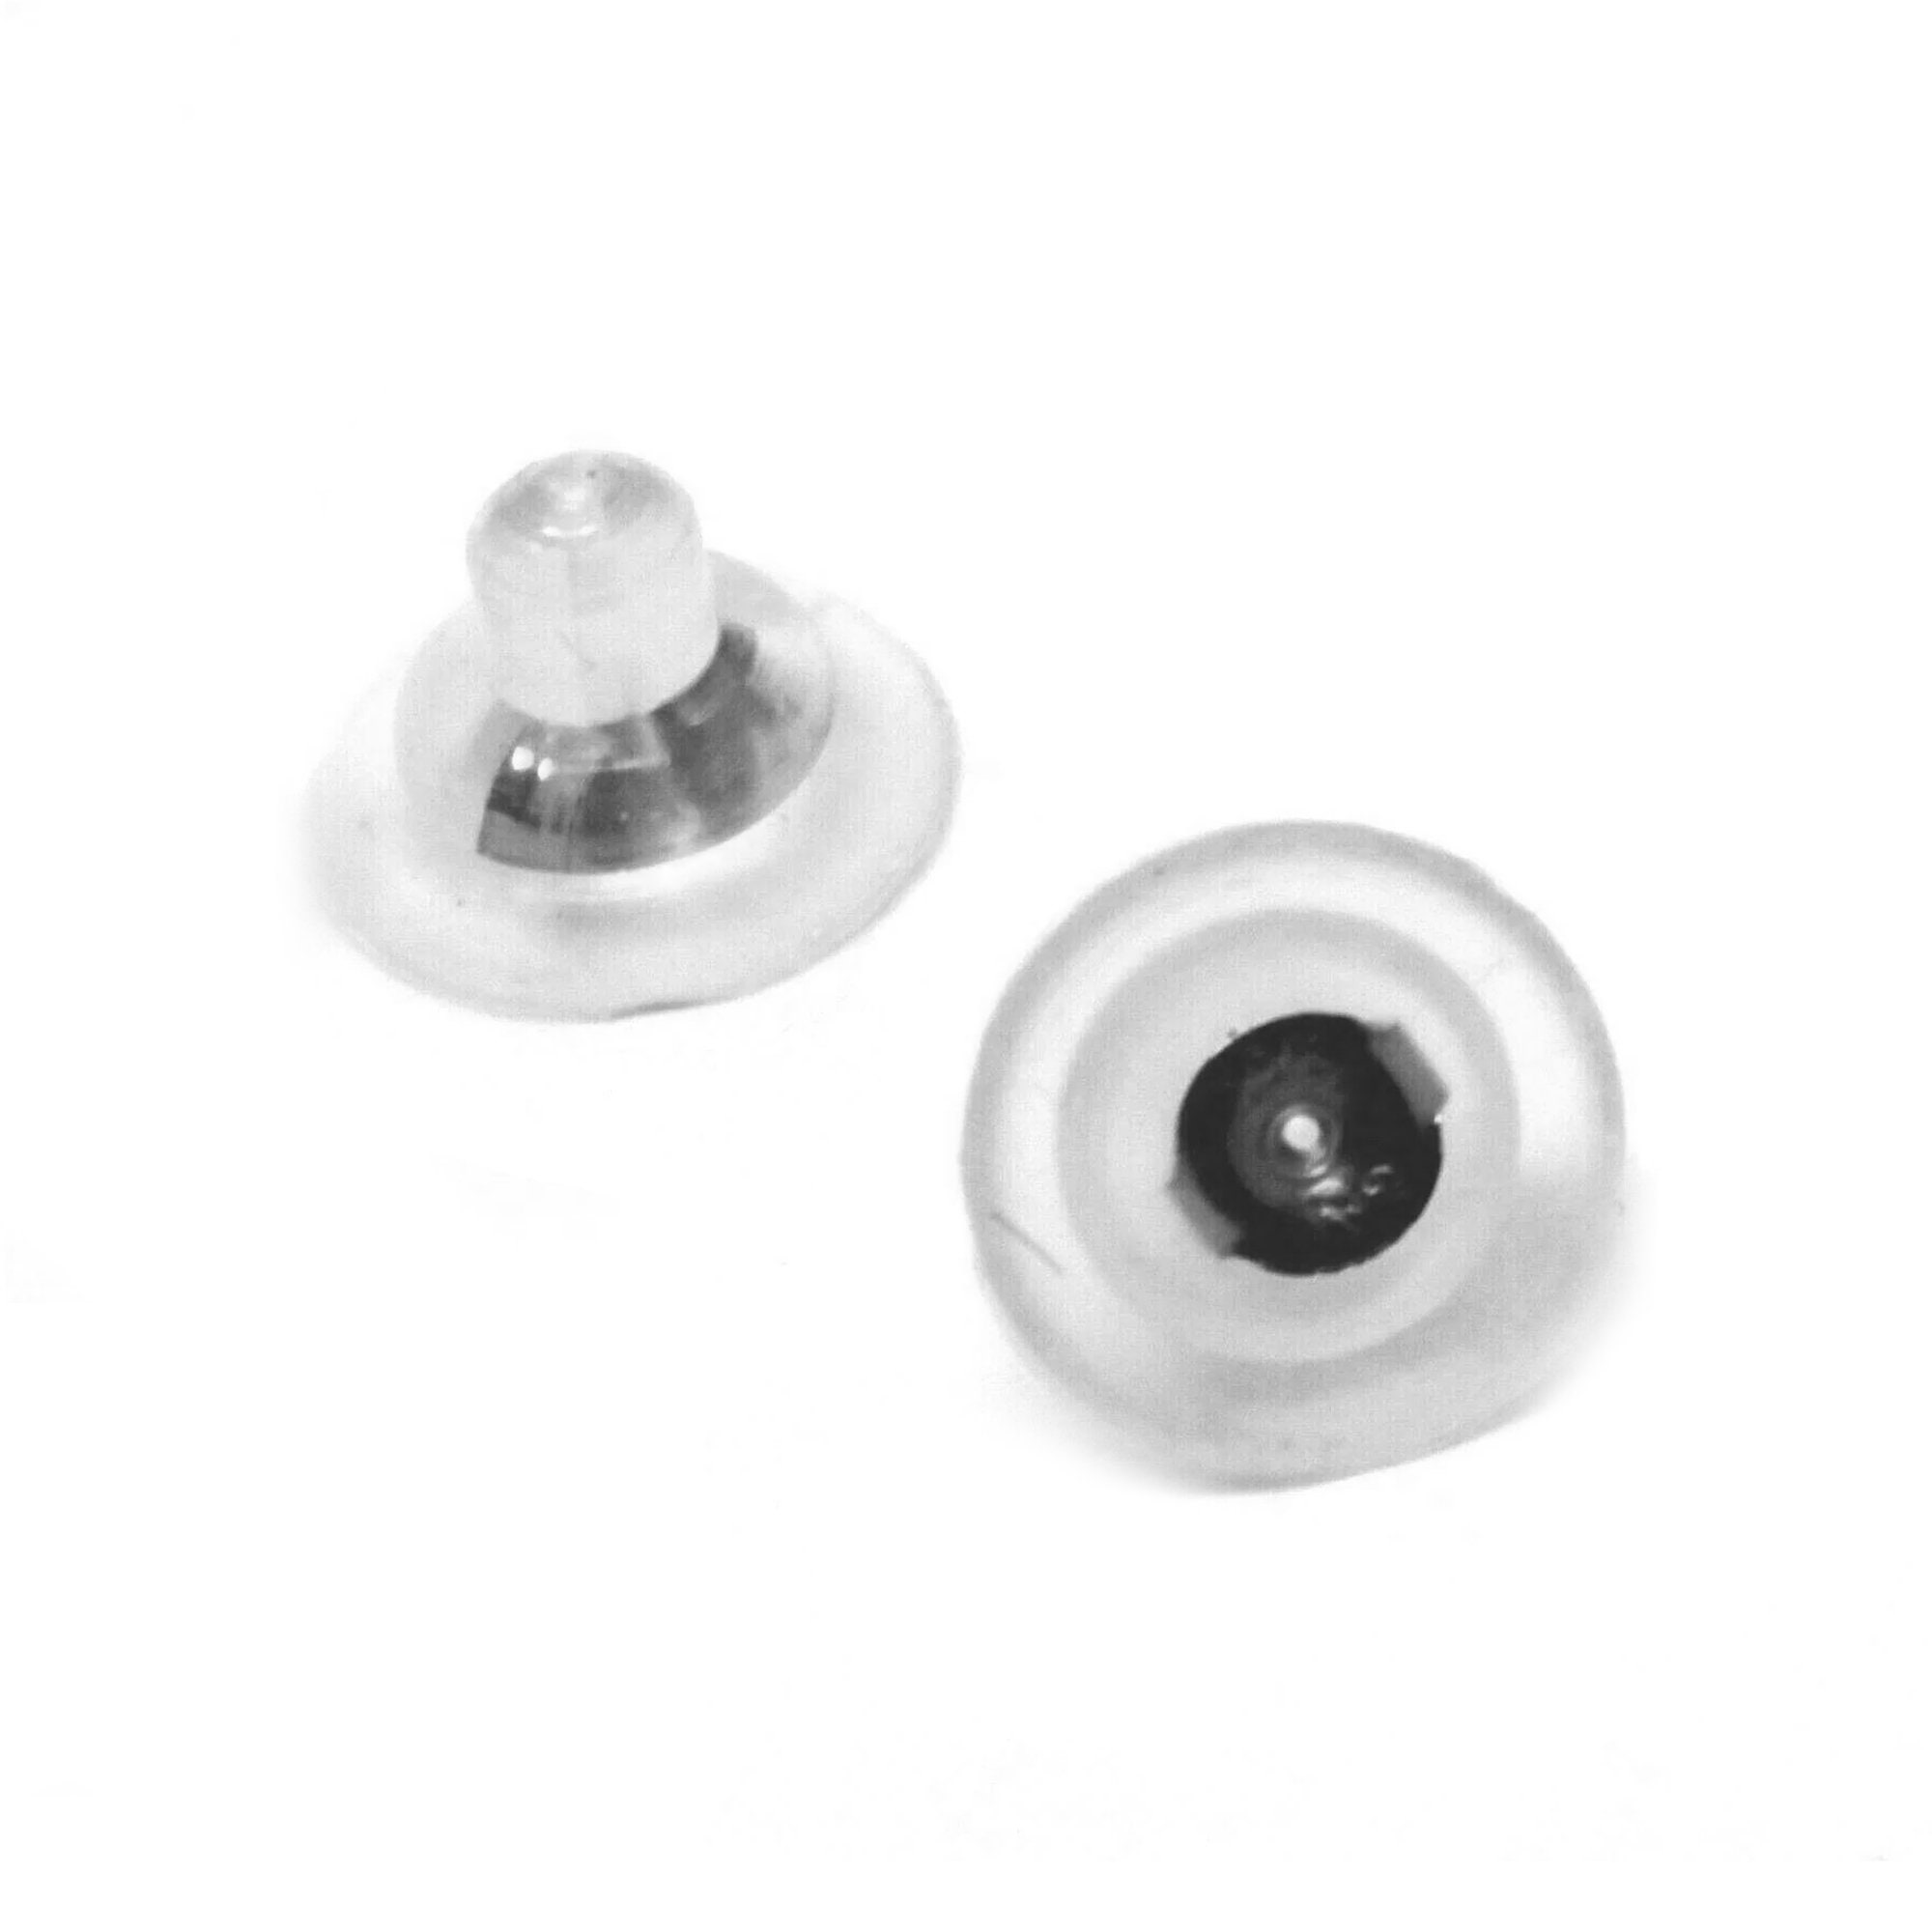 Wholesale Wholesale Hypoallergenic High Quality Earring Backs Bullet Shaped silicone  earring backs From m.